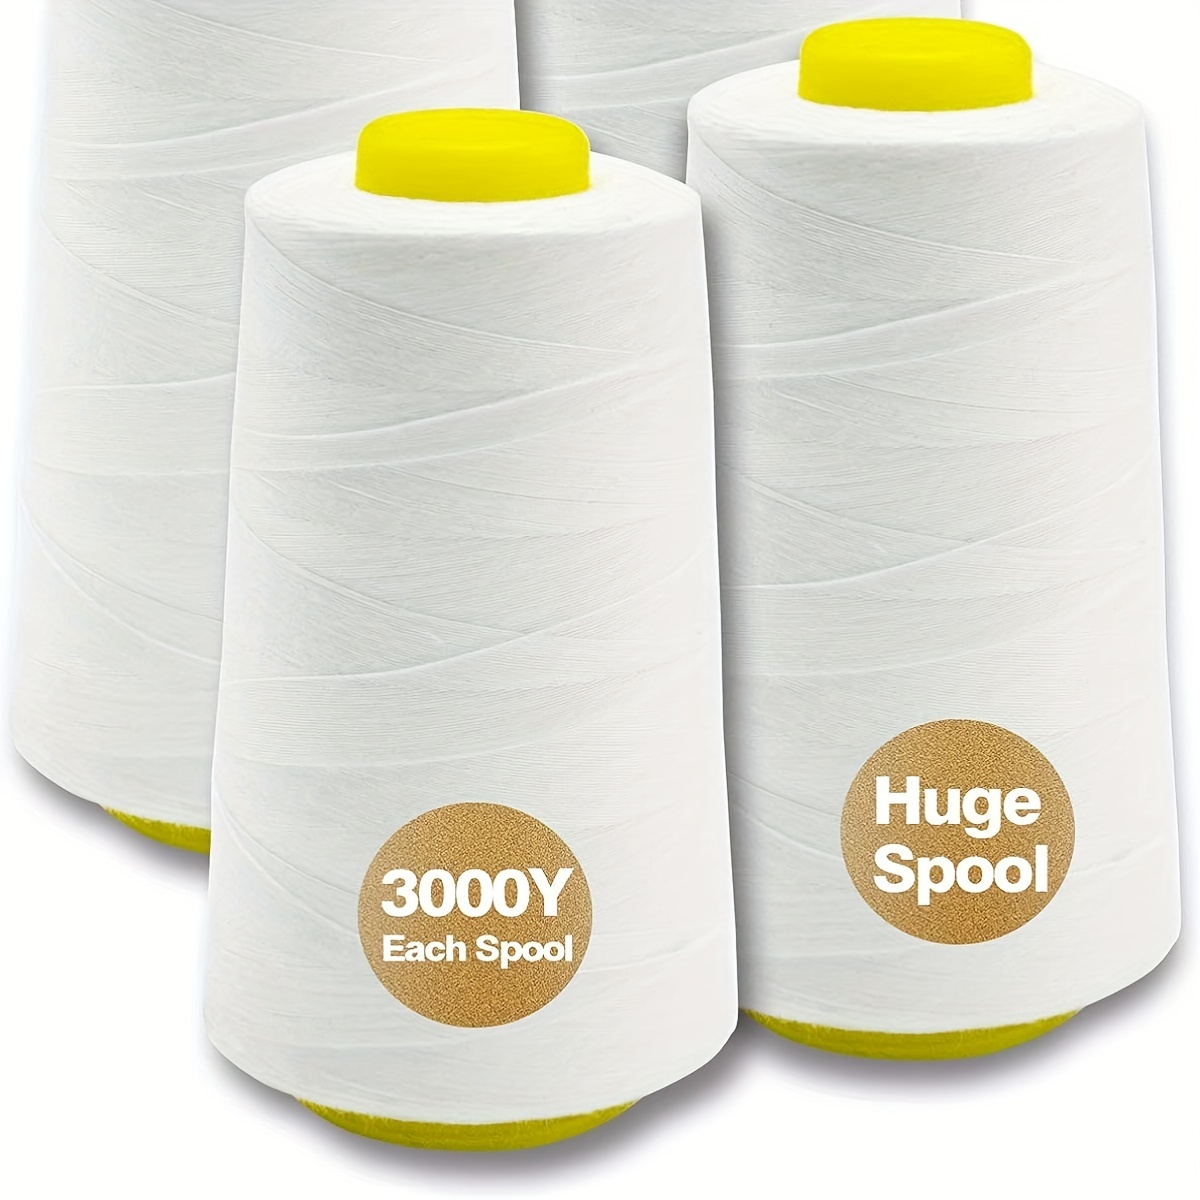 White Sewing Thread 100% Polyester 3000 meters/3280 Yards/Spool of Yarn,  4pcs(12000m/13120yds)/Pack, 40/2 All-Purpose Professional Threads for  Sewing